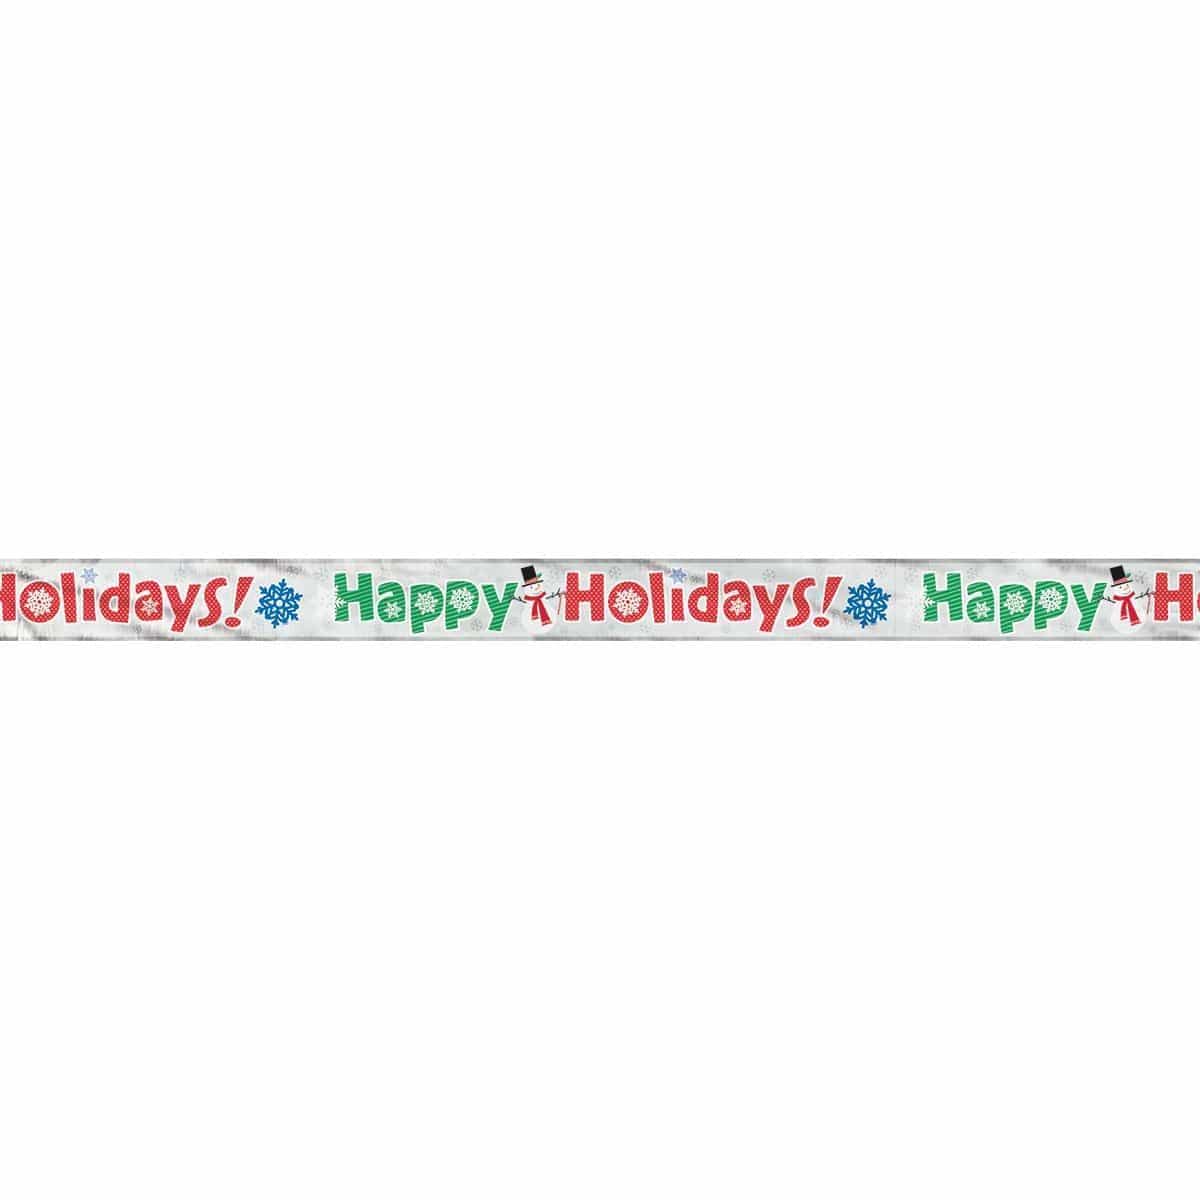 Buy Christmas Happy Holiday Foil Banner 9 Ft. sold at Party Expert